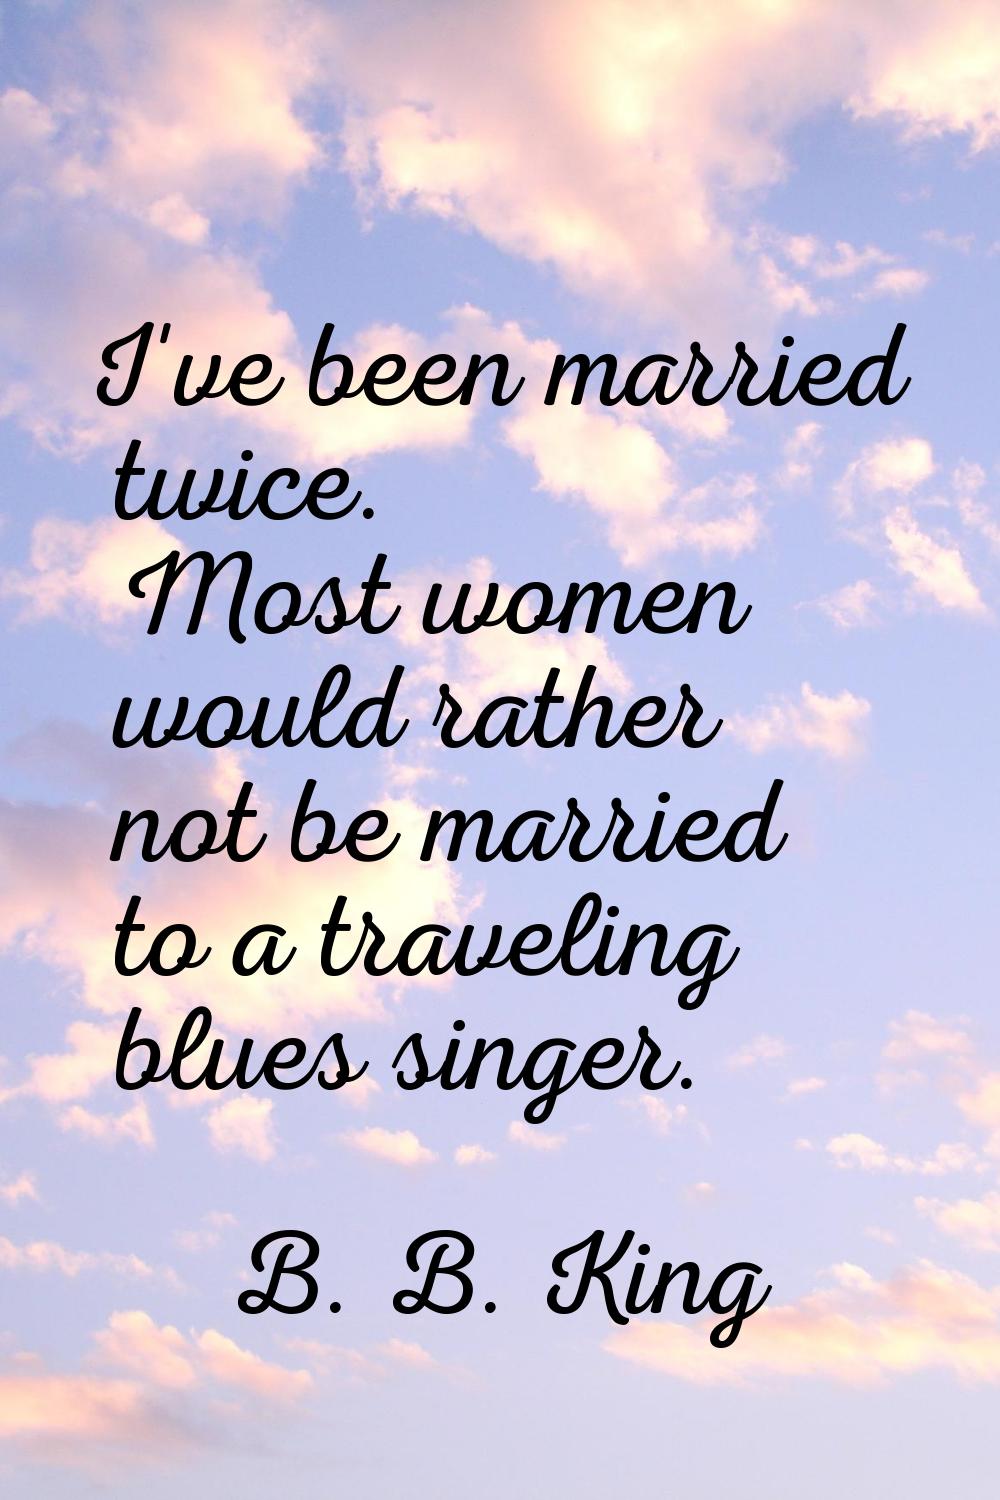 I've been married twice. Most women would rather not be married to a traveling blues singer.